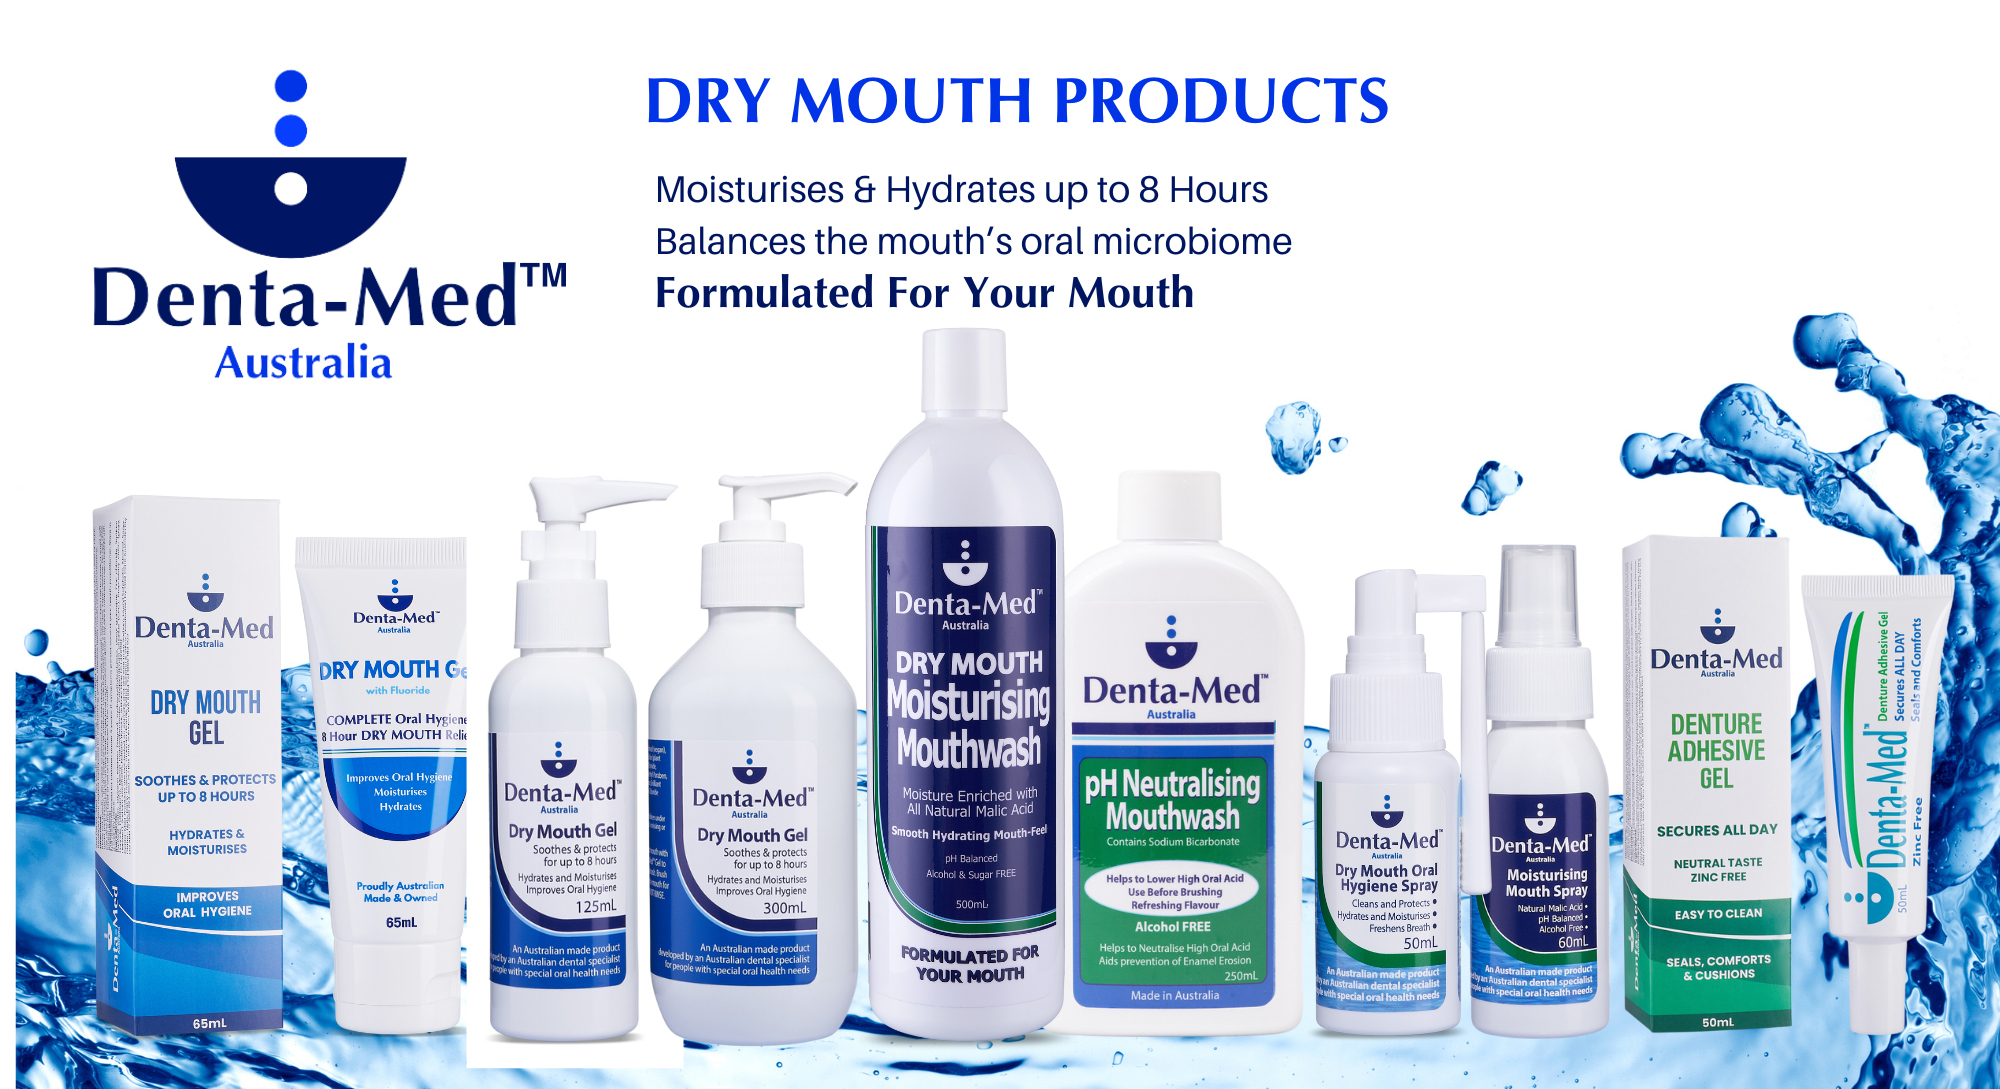 Load video: Dry mouth Relief that actually works